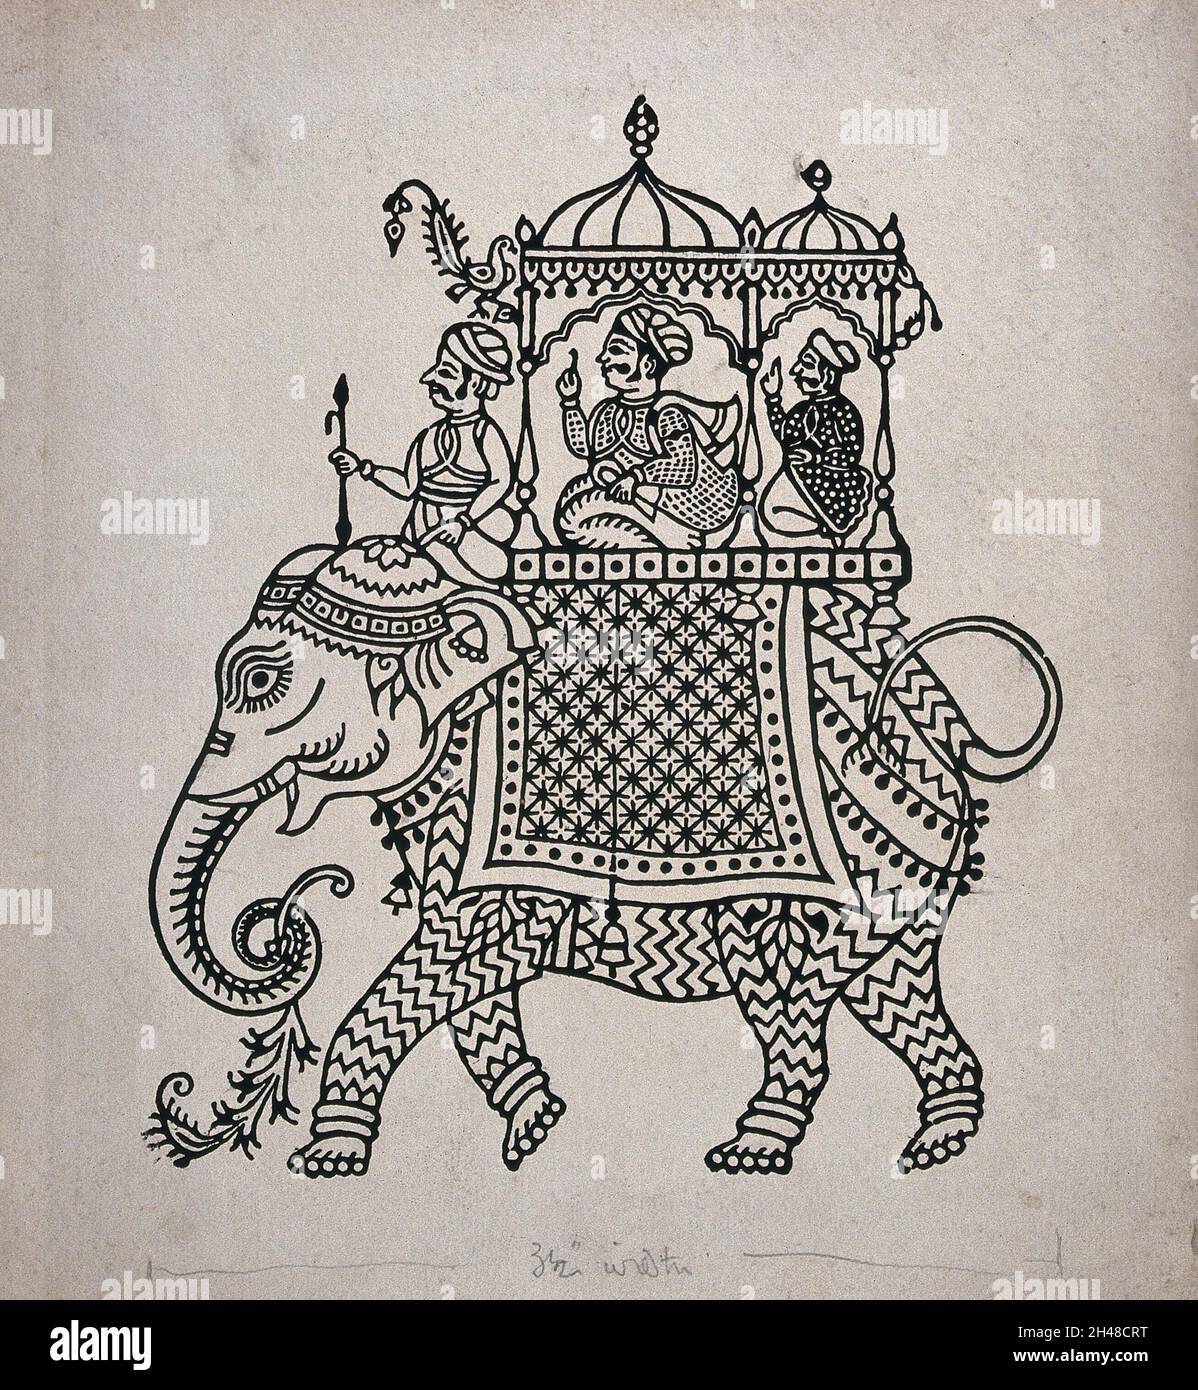 Raja on an elephant in the style of Ahmedabad, Gujarat. Process print. Stock Photo